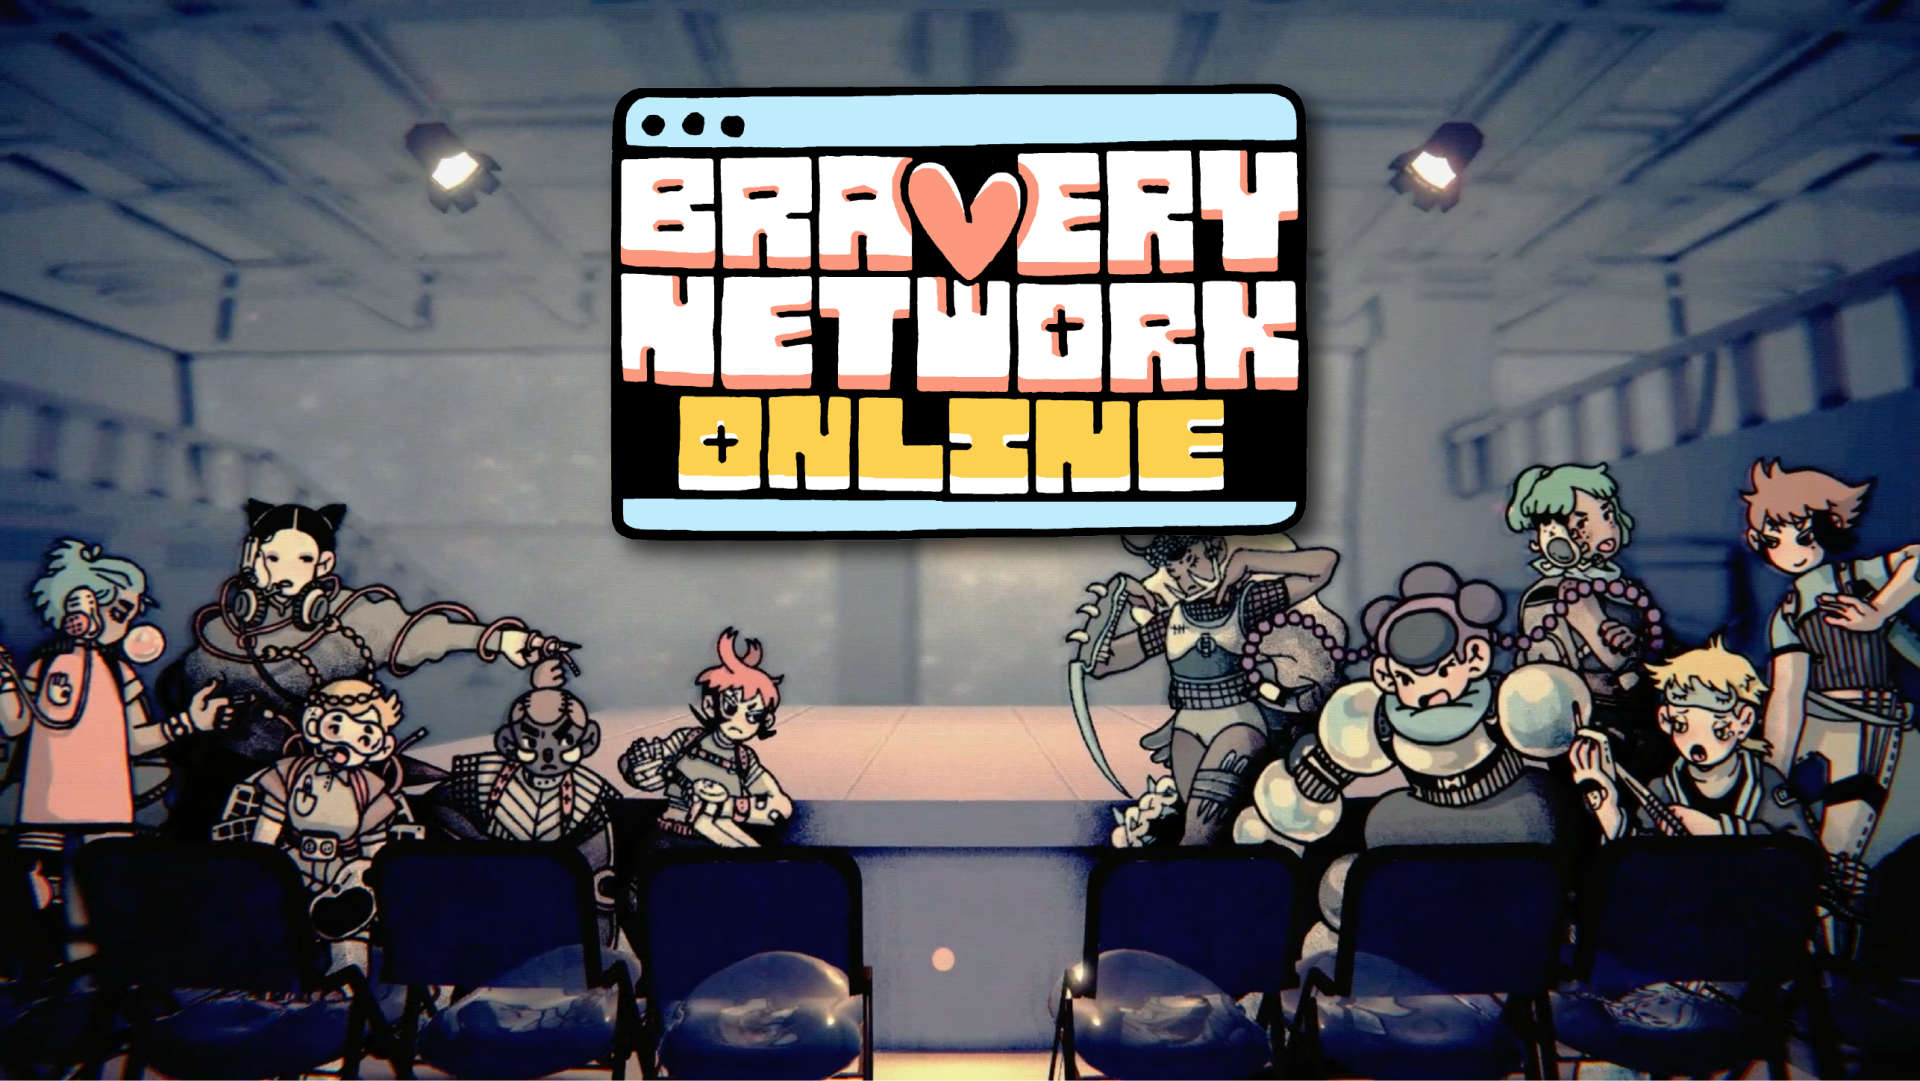 bravery network online characters